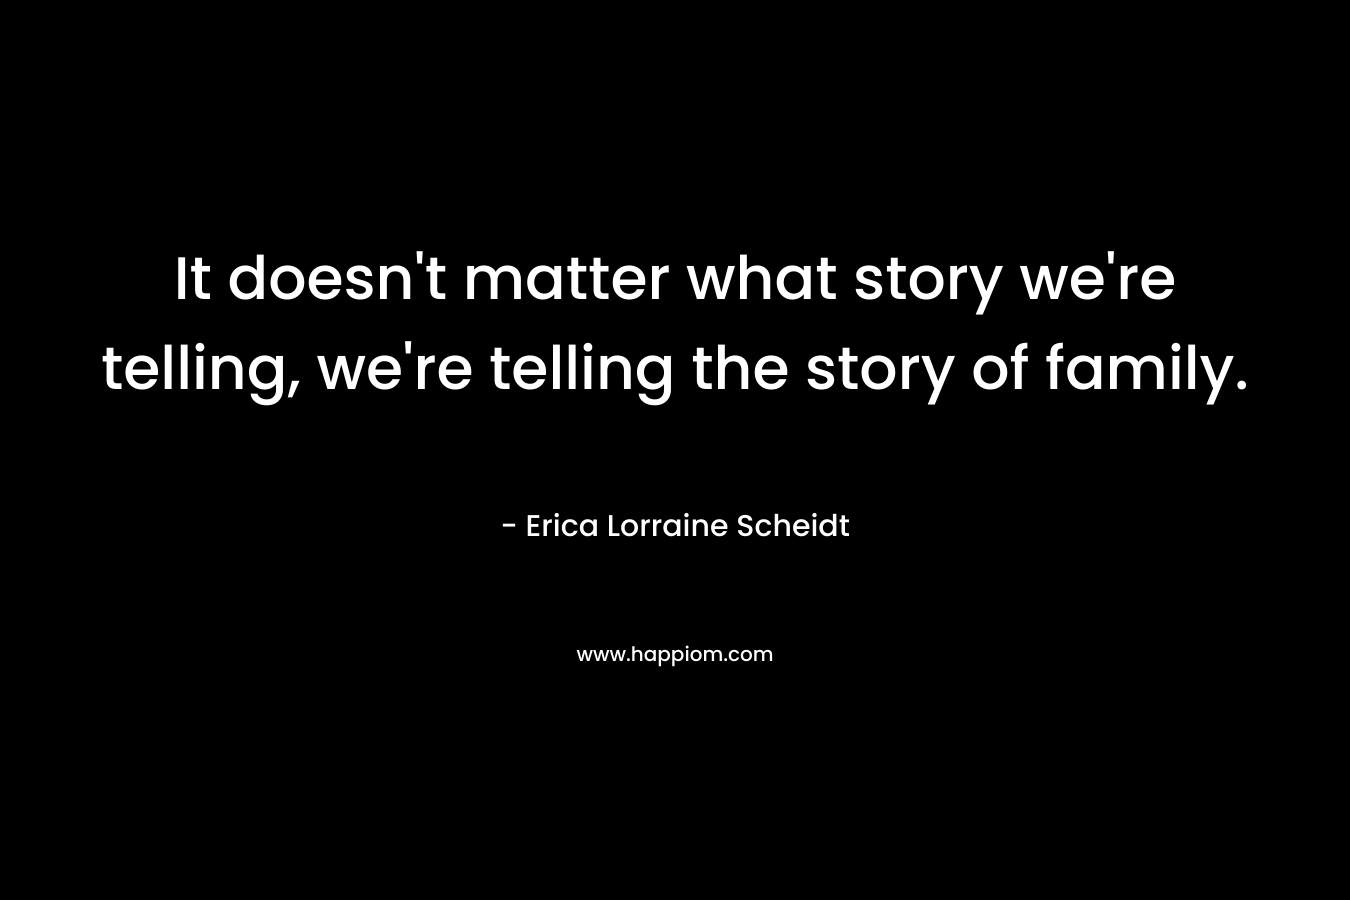 It doesn’t matter what story we’re telling, we’re telling the story of family. – Erica Lorraine Scheidt